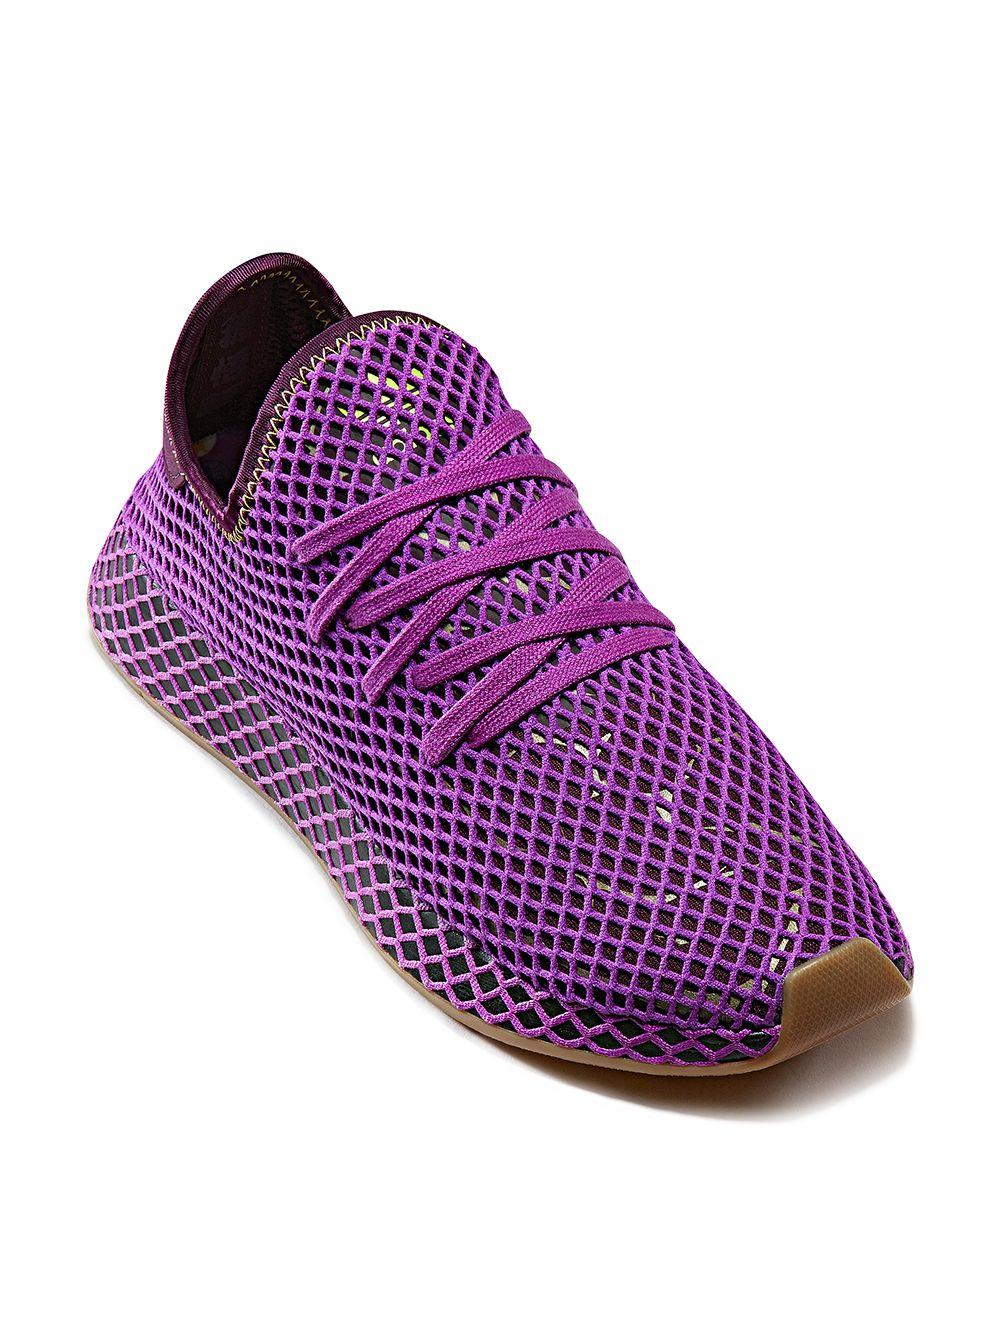 adidas Rubber Purple Deerupt Dragon Ball Z Gohan Edition Sneakers for Men -  Lyst